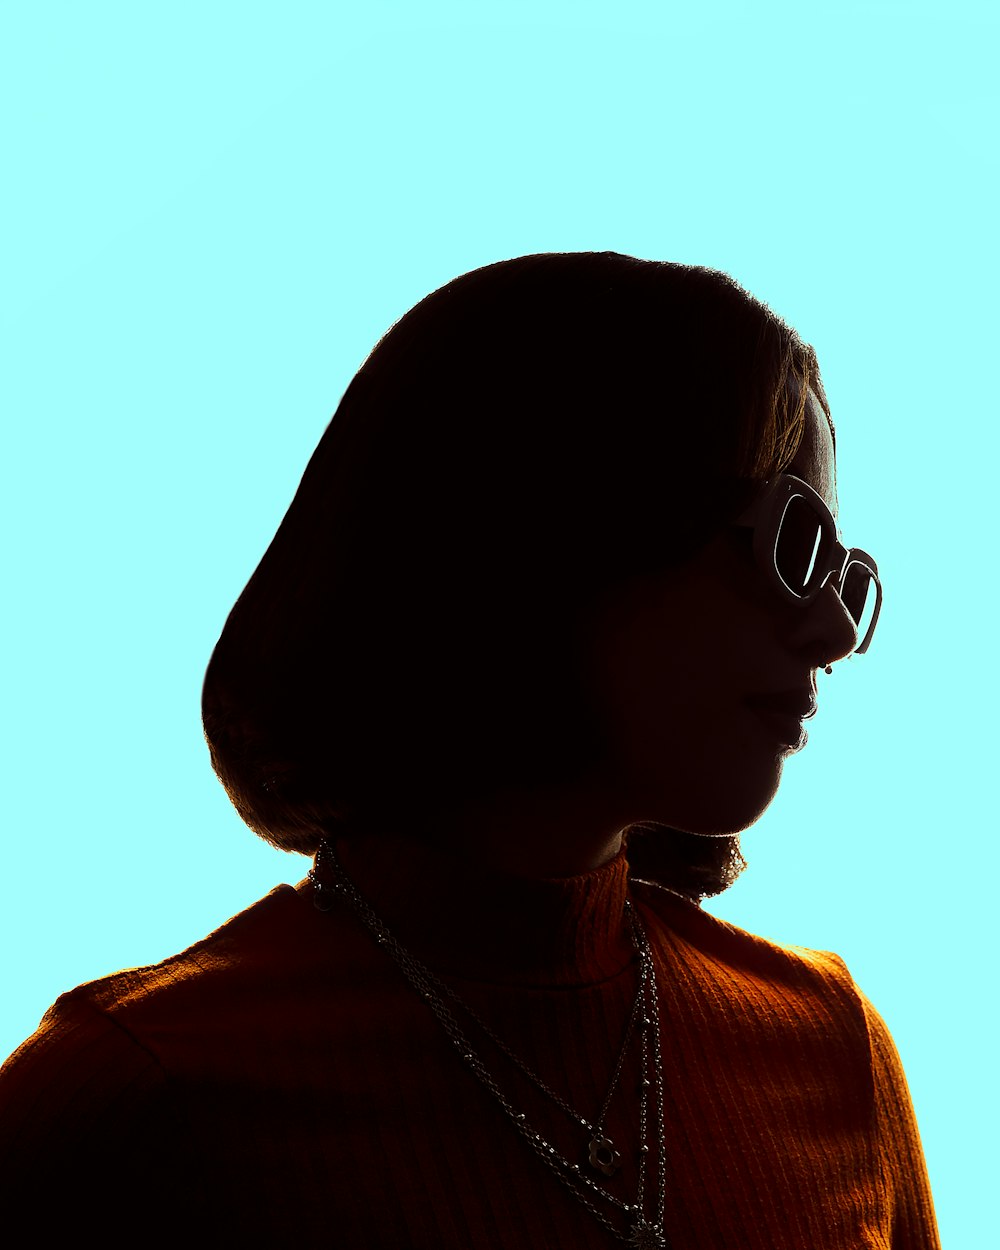 a silhouette of a person wearing sunglasses and a necklace